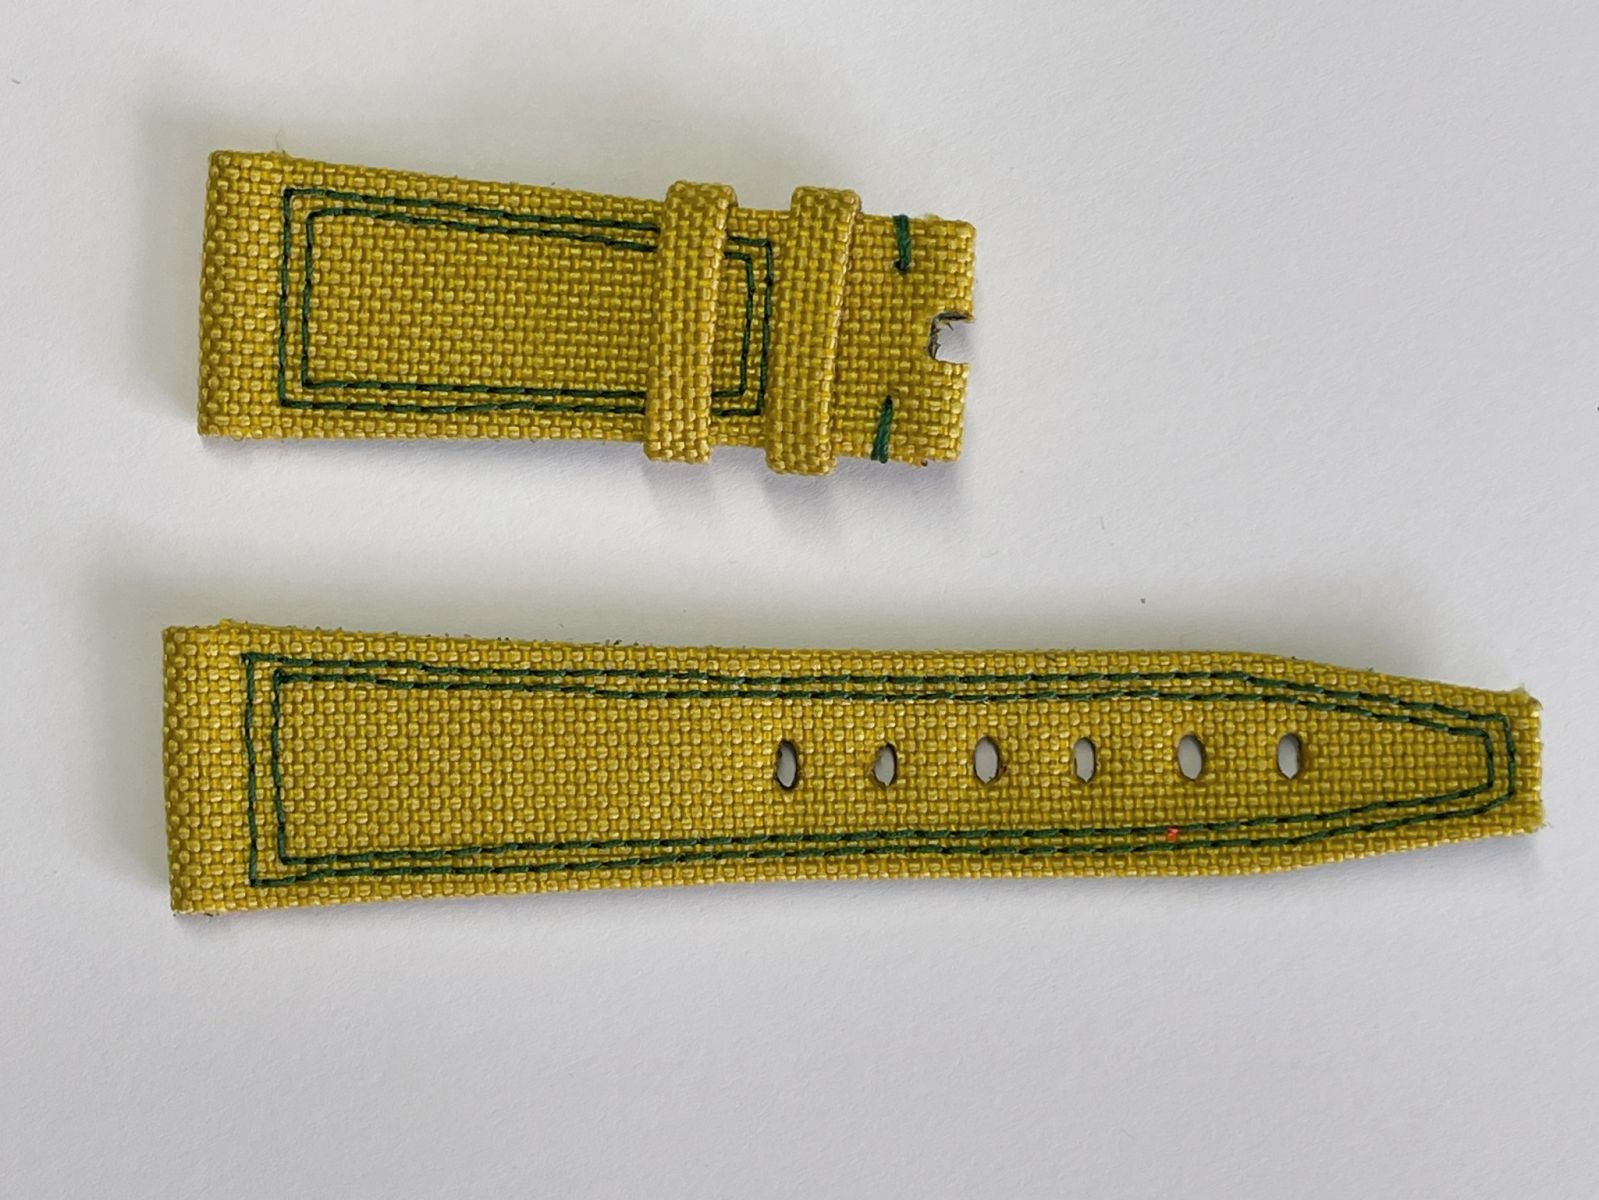 Cordura® Strap (Apple Watch All Series) / GOLD YELLOW / Green double stitching